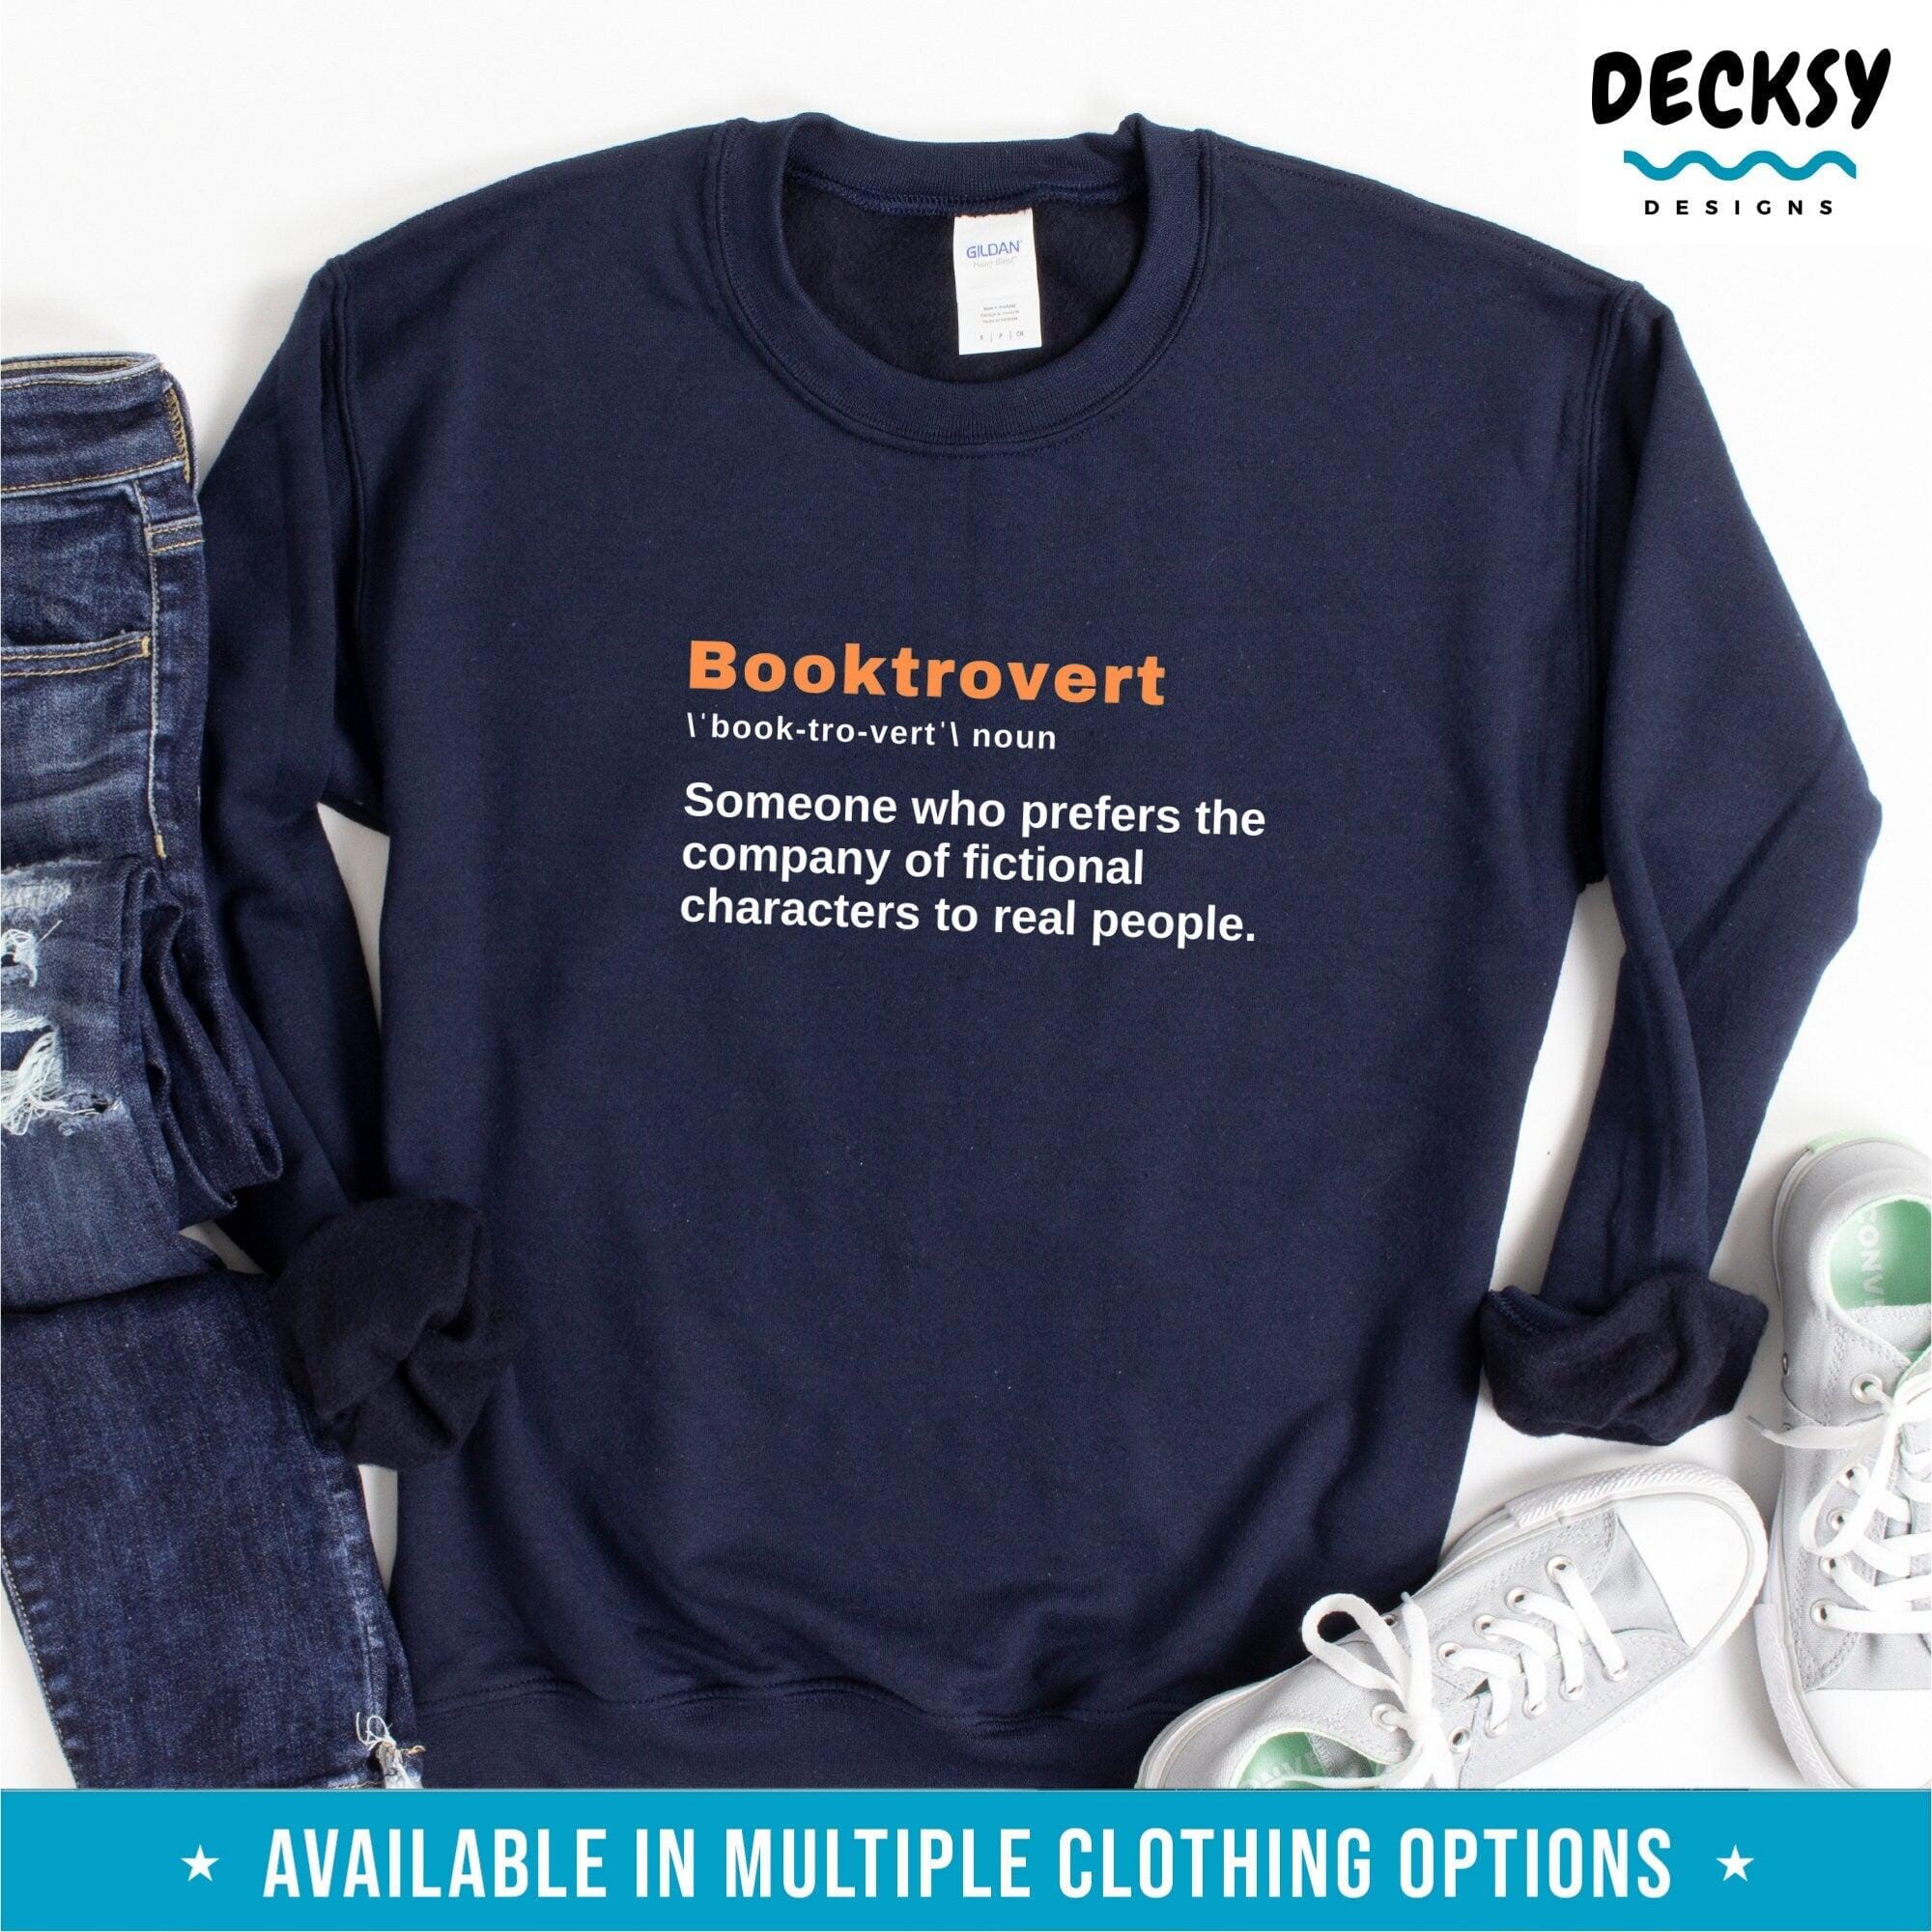 Funny Book Tshirt, Booktrovert Shirt, Book Lover Gift-Clothing:Gender-Neutral Adult Clothing:Tops & Tees:T-shirts:Graphic Tees-DecksyDesigns